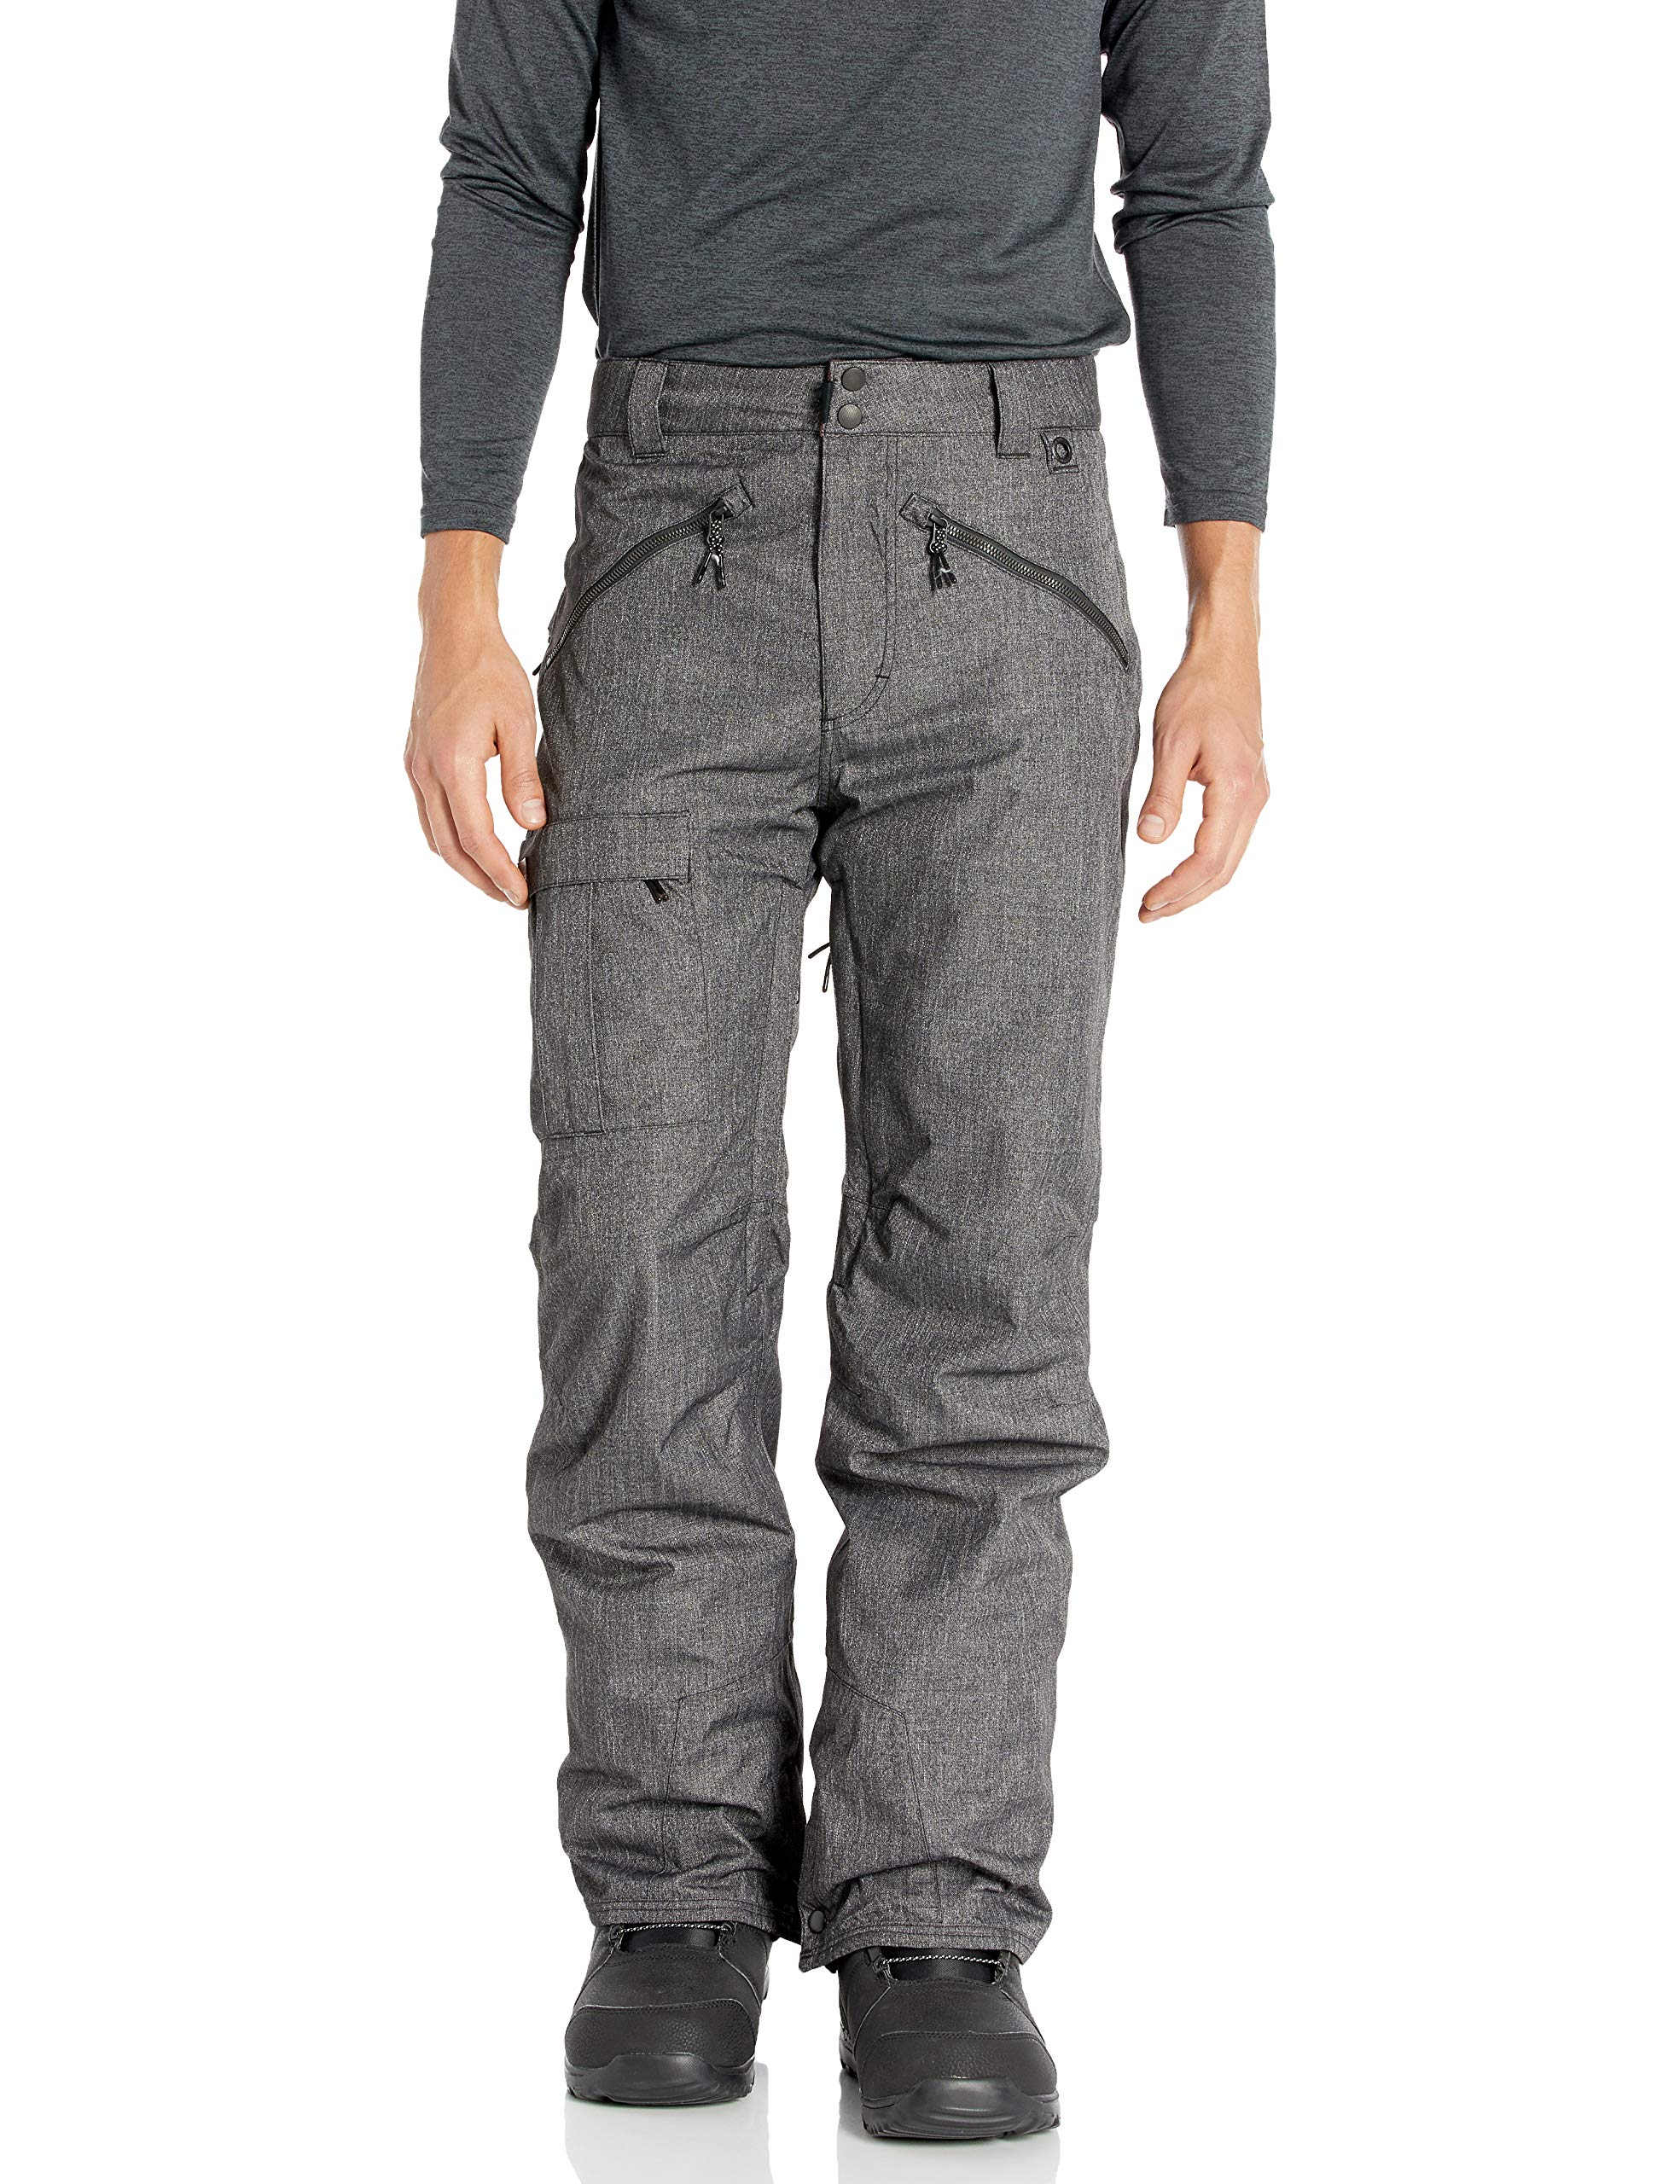 Ride Snowboard Outerwear Mens Yesler Pants 